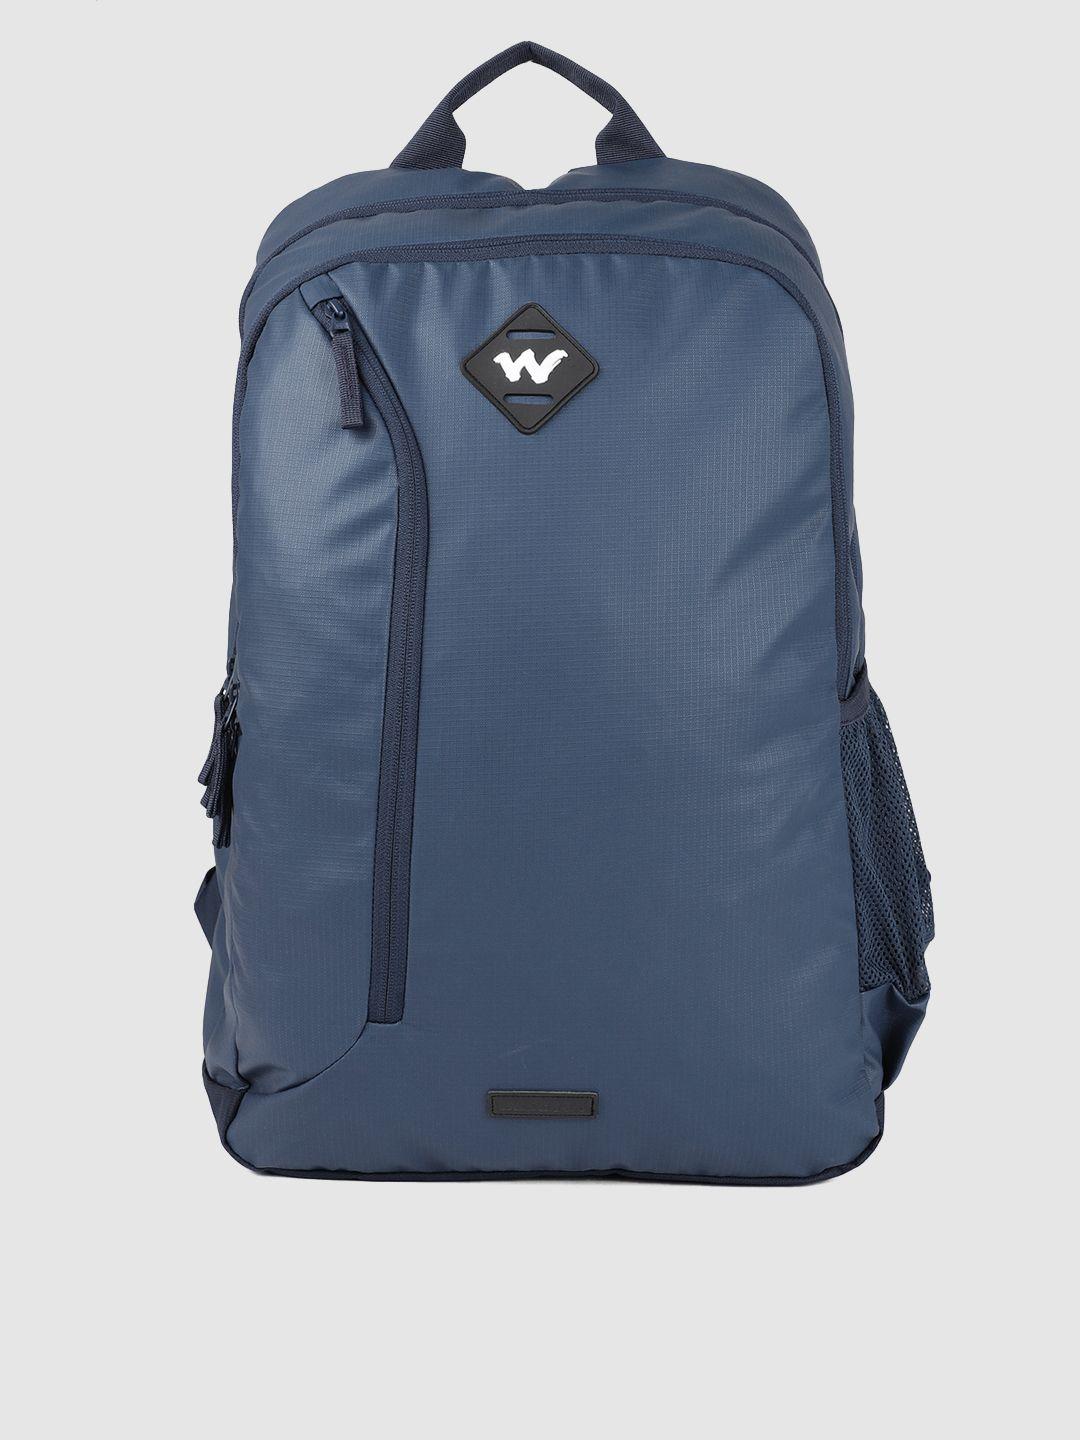 wildcraft-unisex-blue-solid-corpro-1.0-plus-coated-backpack